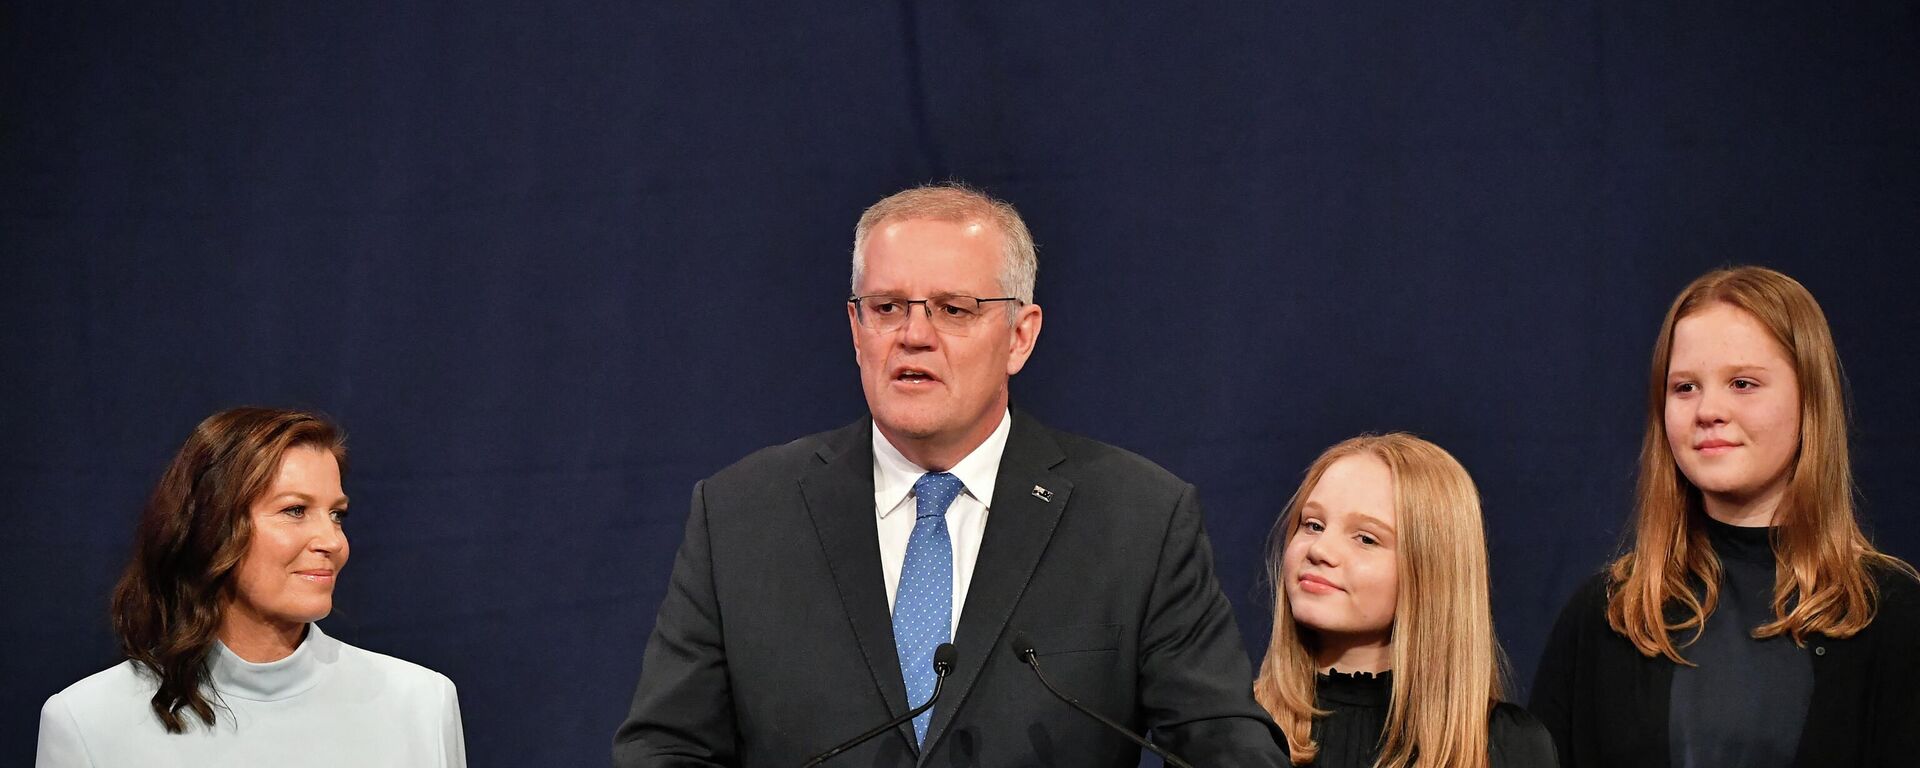 Australia's Prime Minister Scott Morrison, flanked by his wife Jenny (L) and their daughters, concedes defeat in the national elections in Sydney on May 21, 2022 - Sputnik International, 1920, 21.05.2022